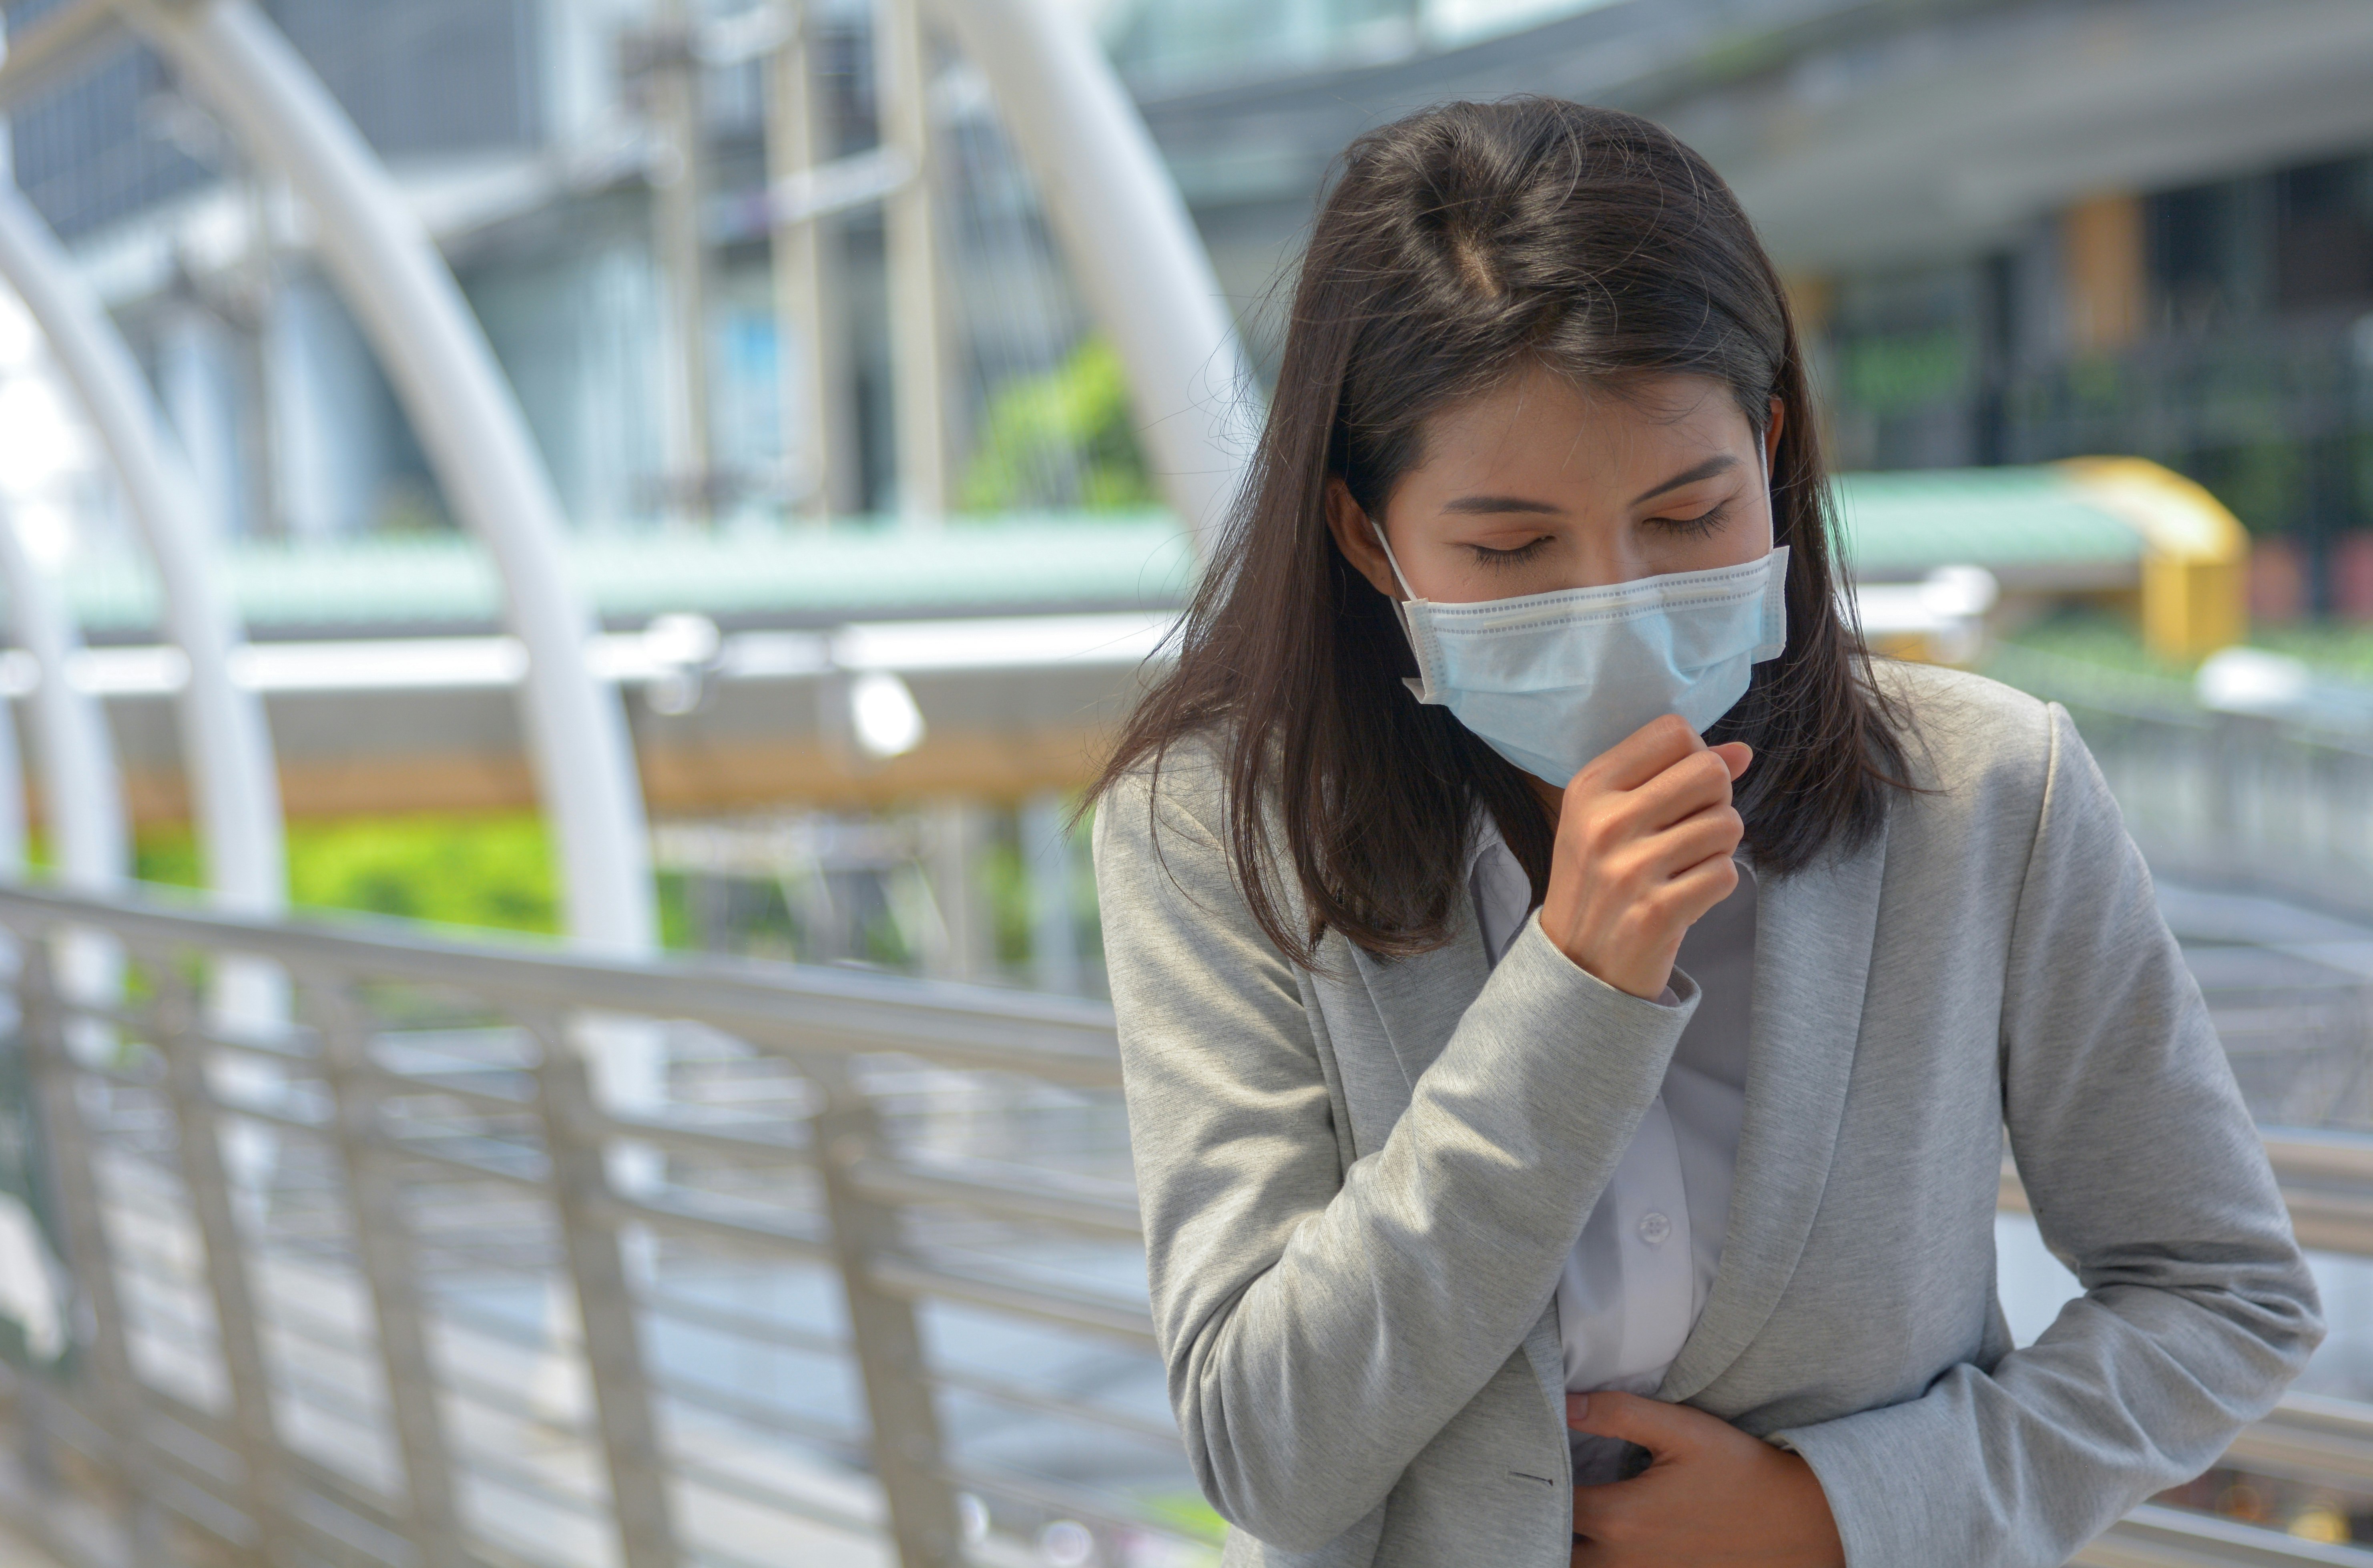 Woman coughing with a surgical mask in an airport